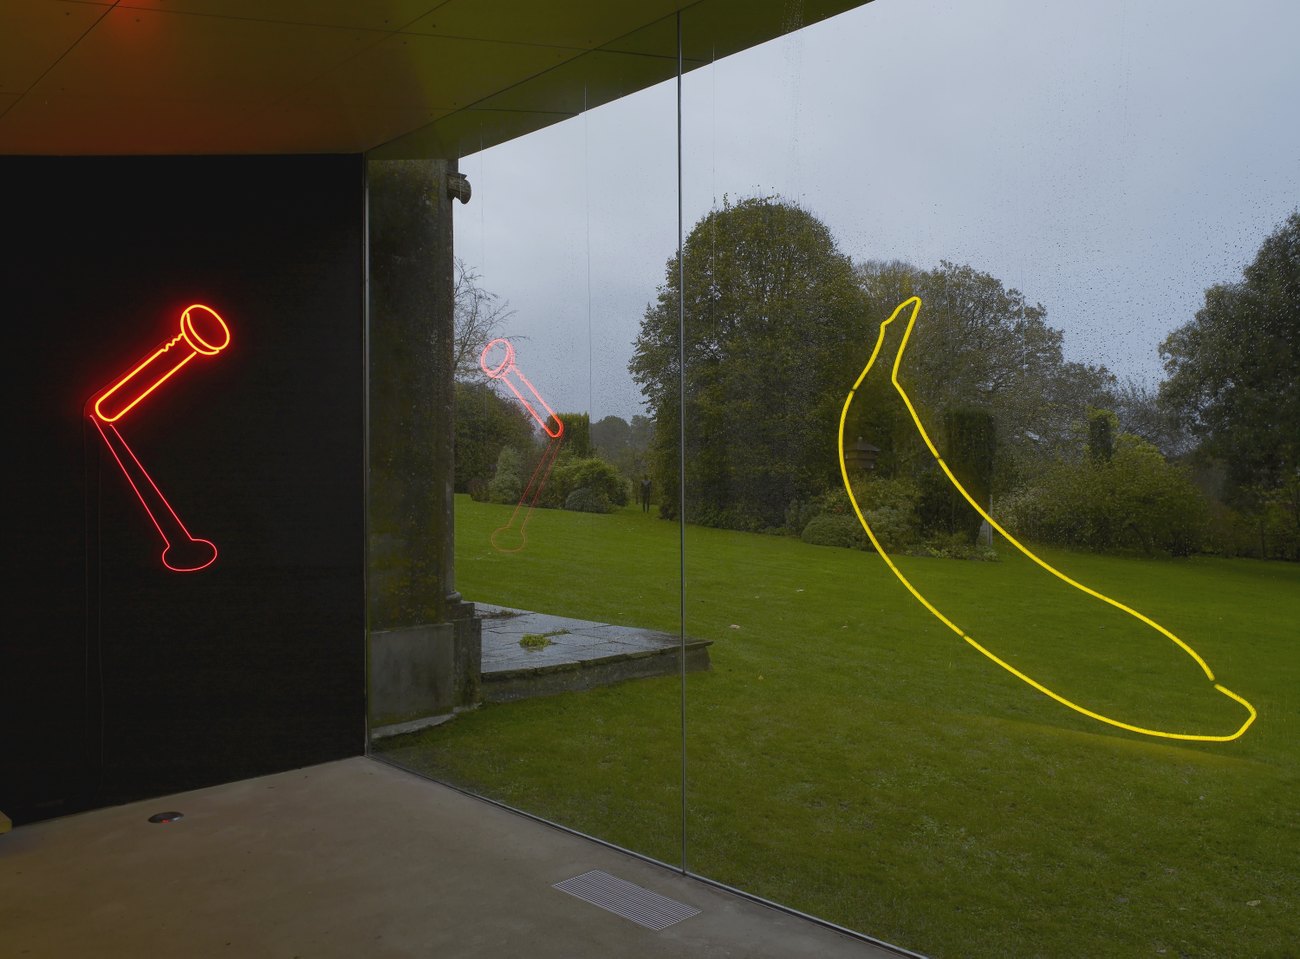 A red neon nail in the wall on a black backdrop, the reflection of a yellow neon banana reflected in a glass window overlooking a grassy garden